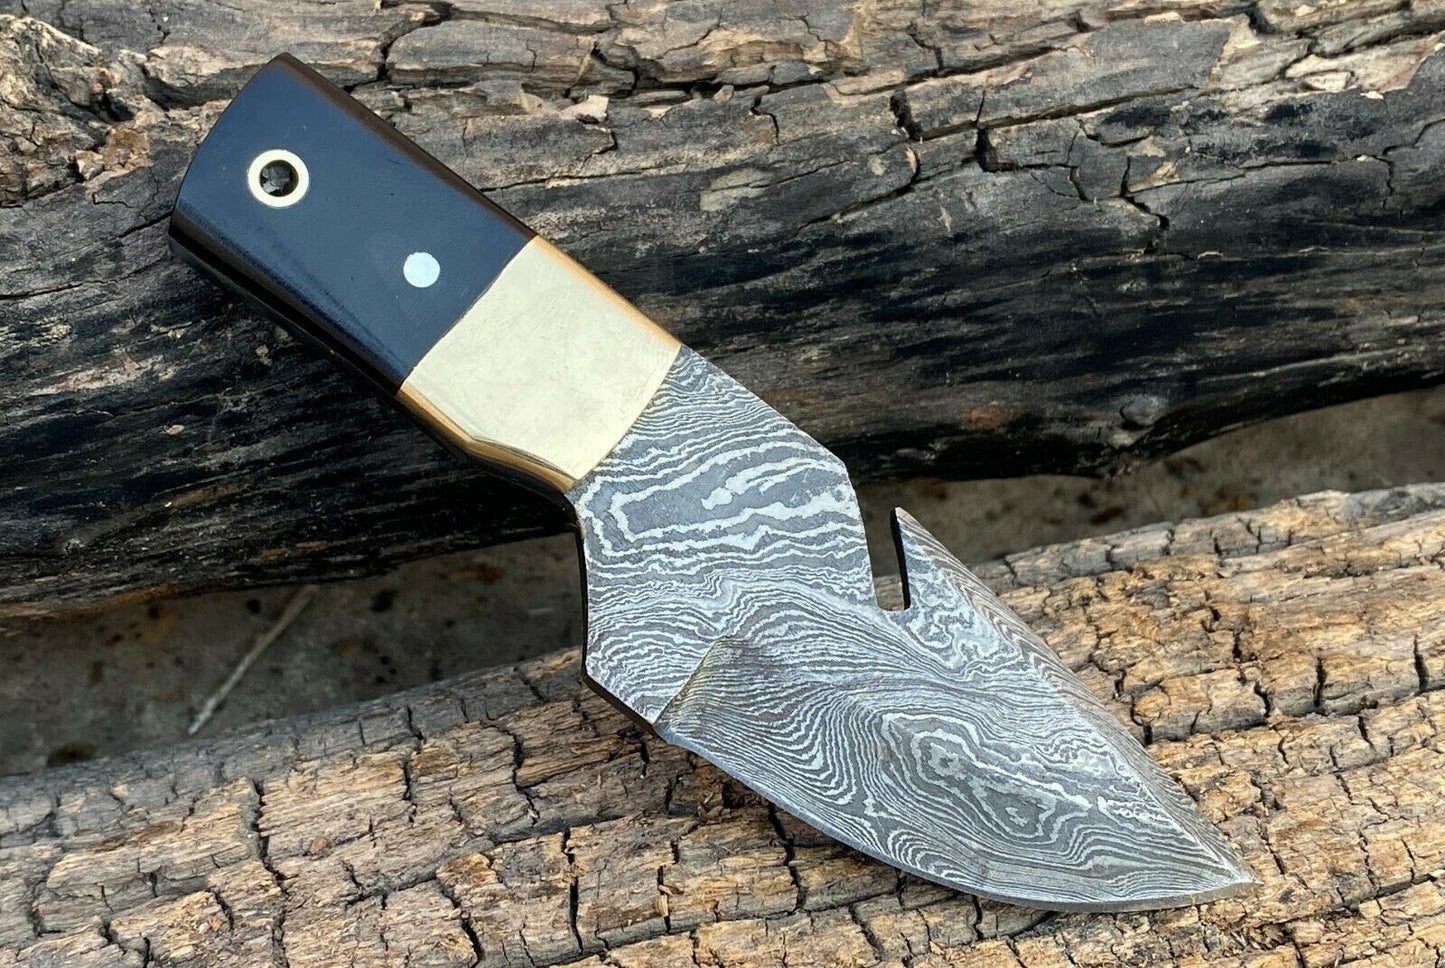 4.5" HAND FORGED Damascus Steel Gut Hook Neck Knife "Horn Handle With Sheath